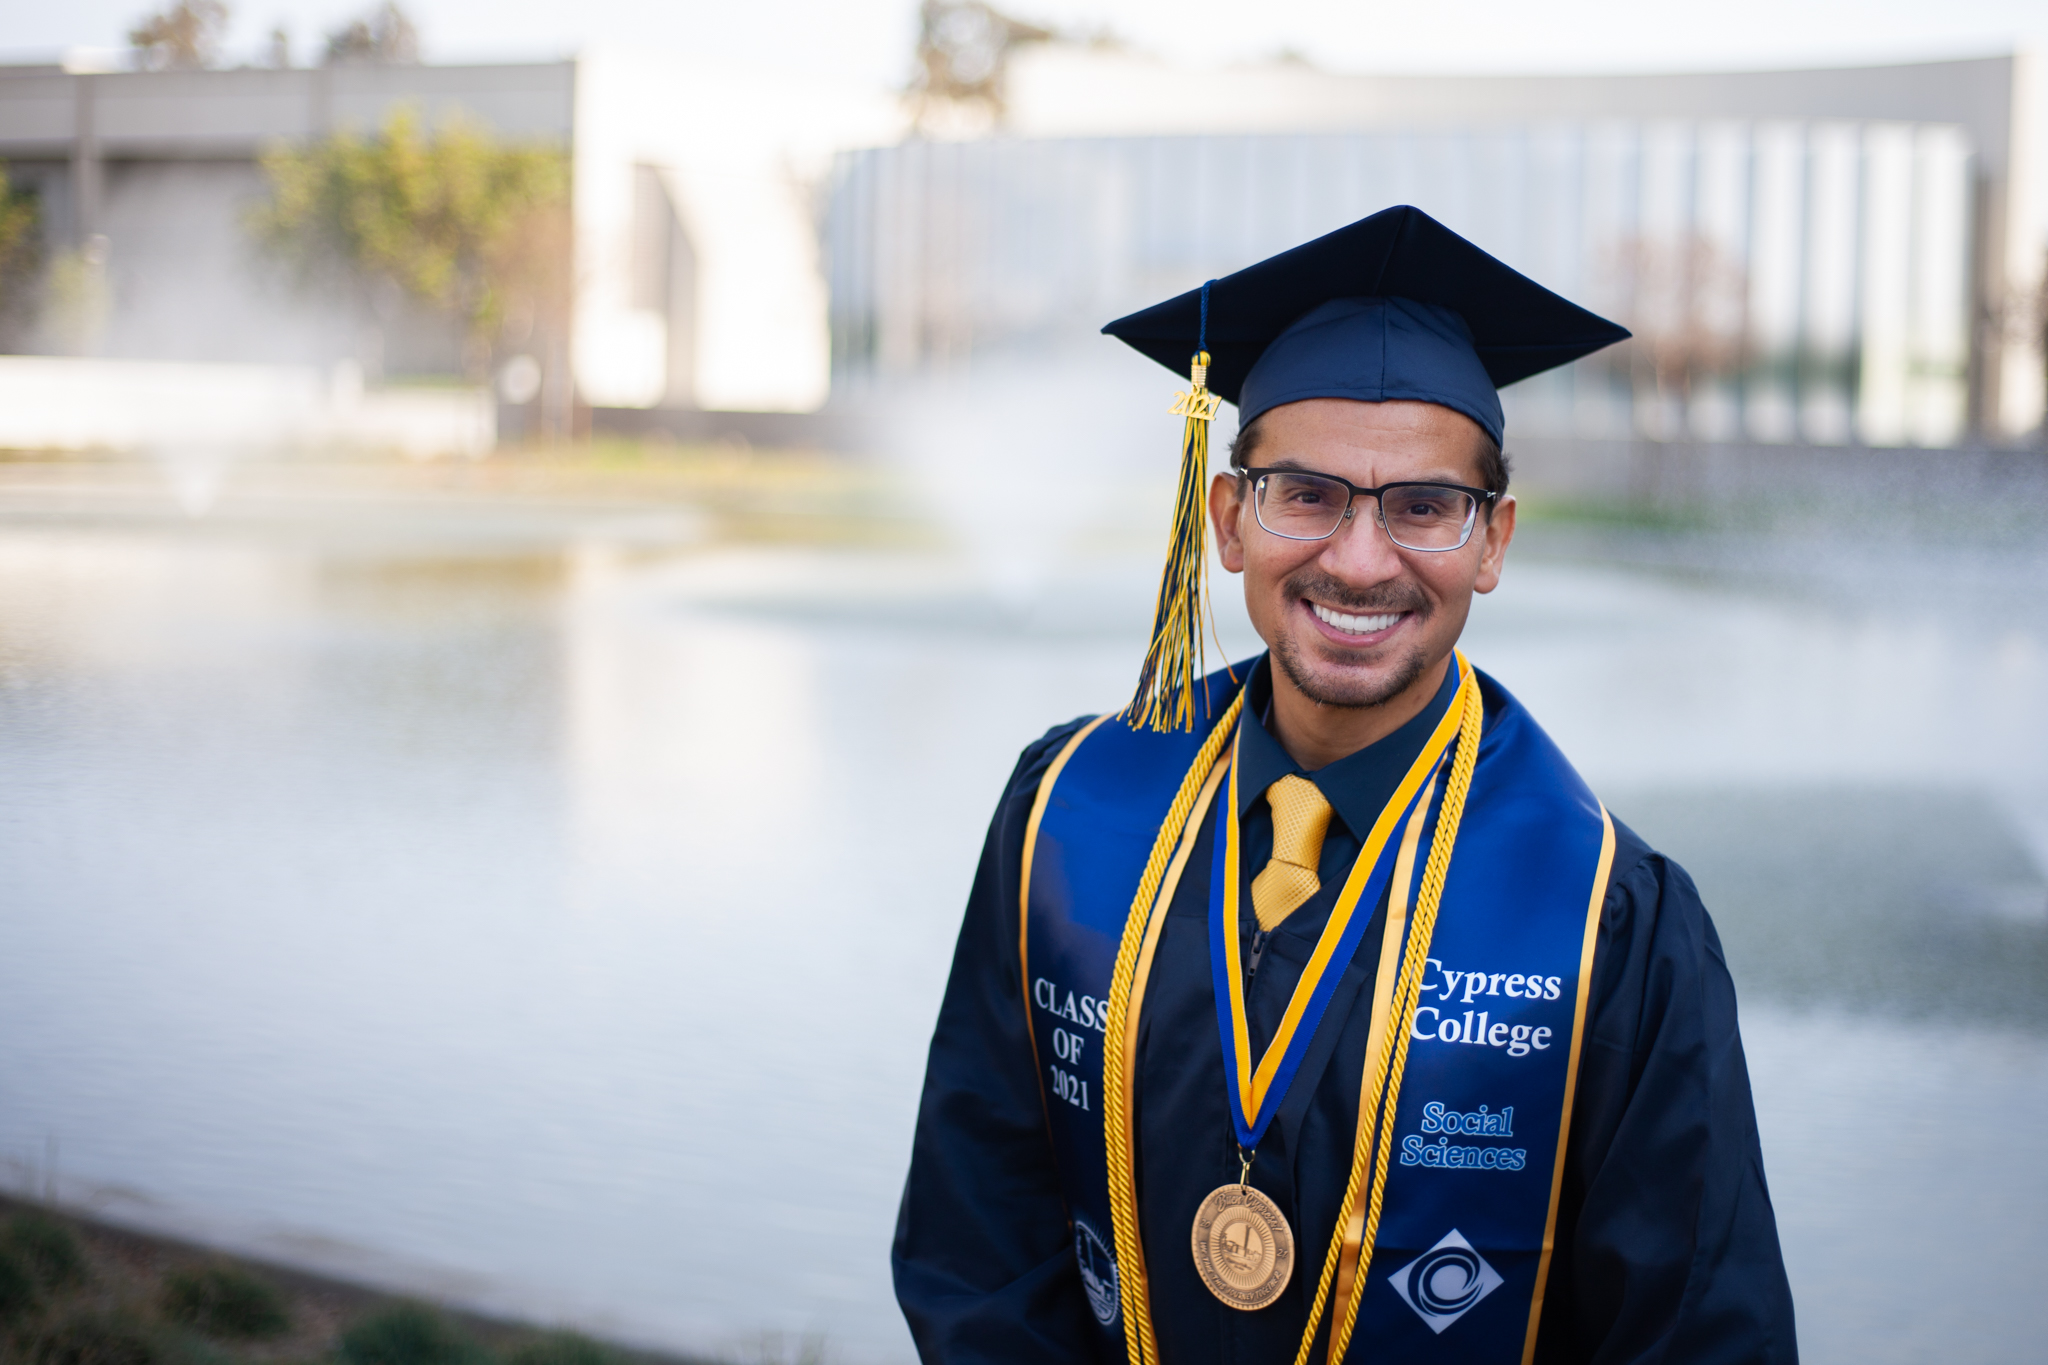 Student Wilfredo Carrasco wears graduation regalia and poses in front of Cypress College pond with fountain in background.